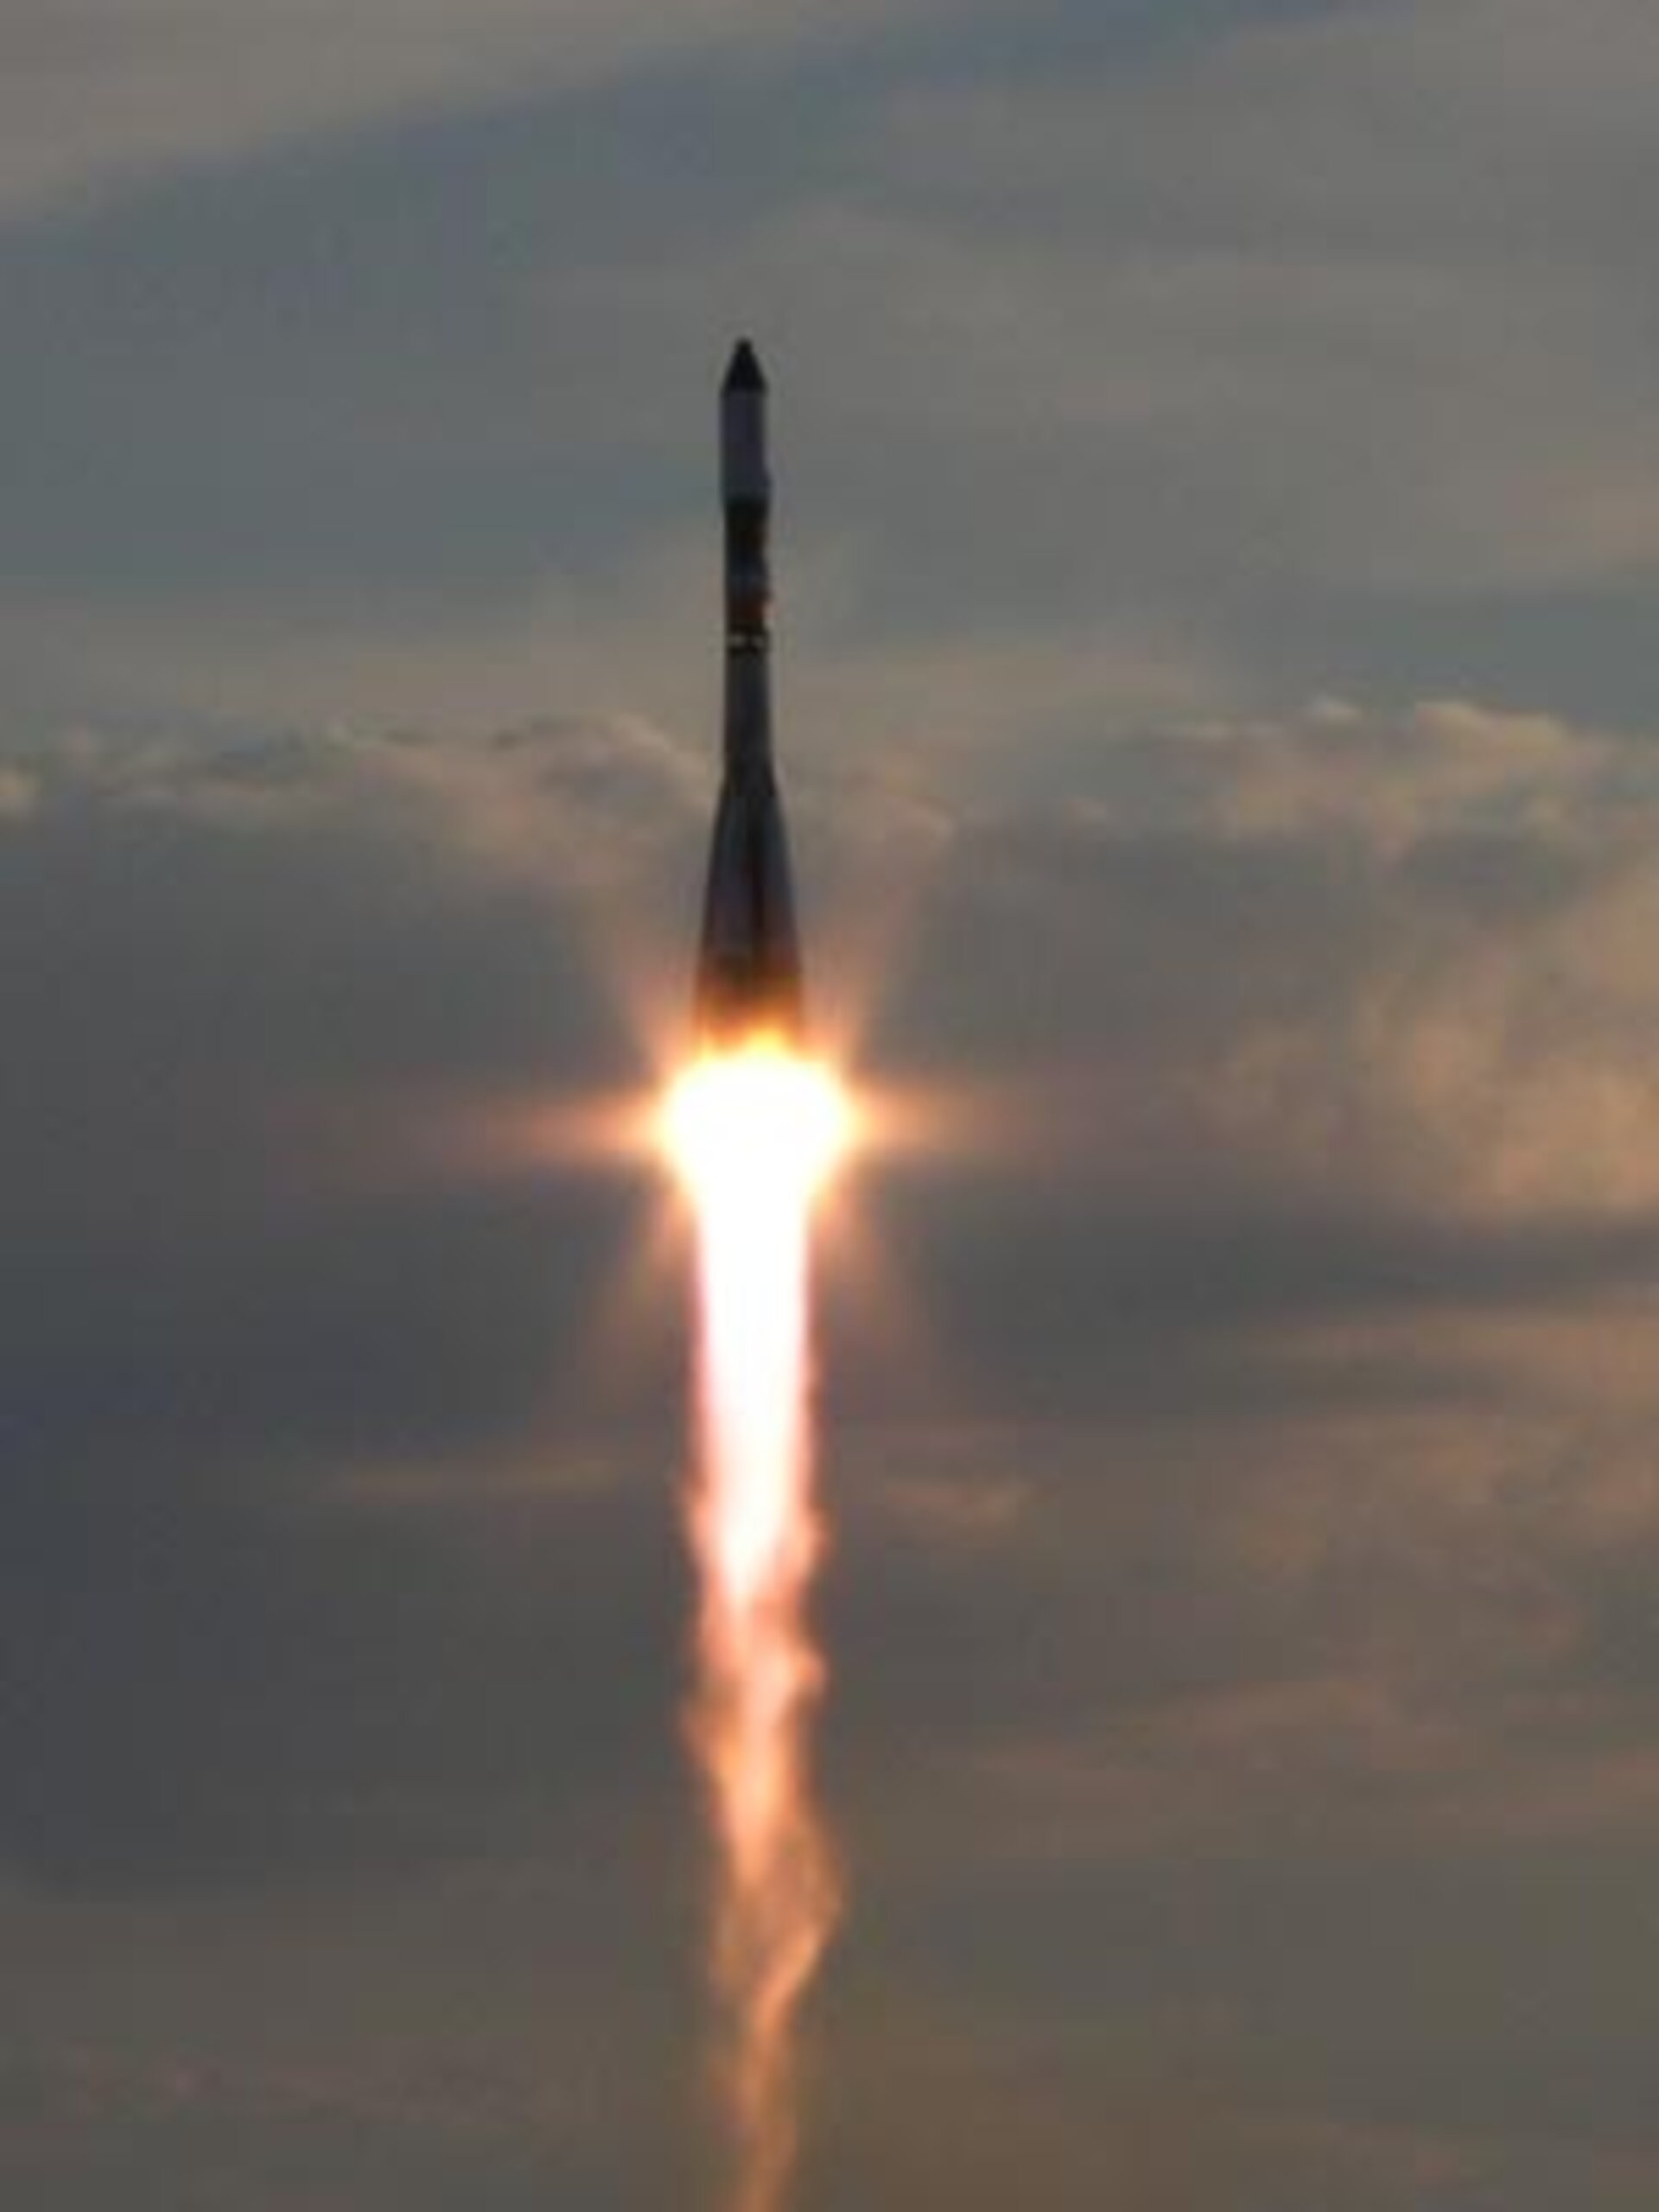 Progress M-48 was launched on 29 August from Baikonur